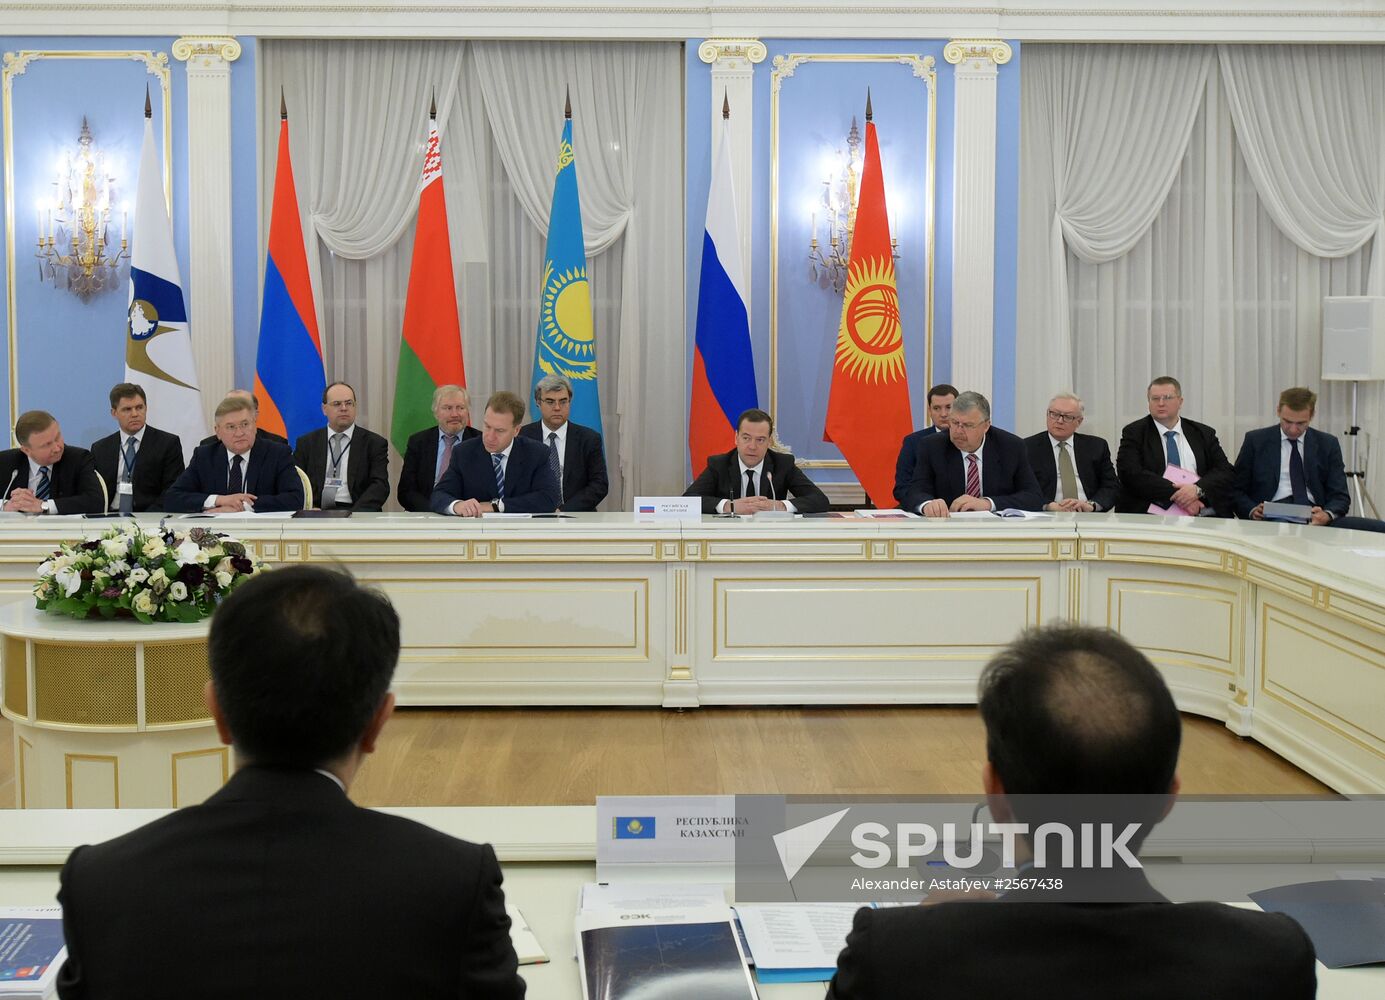 First session of EEU Intergovernmental Council